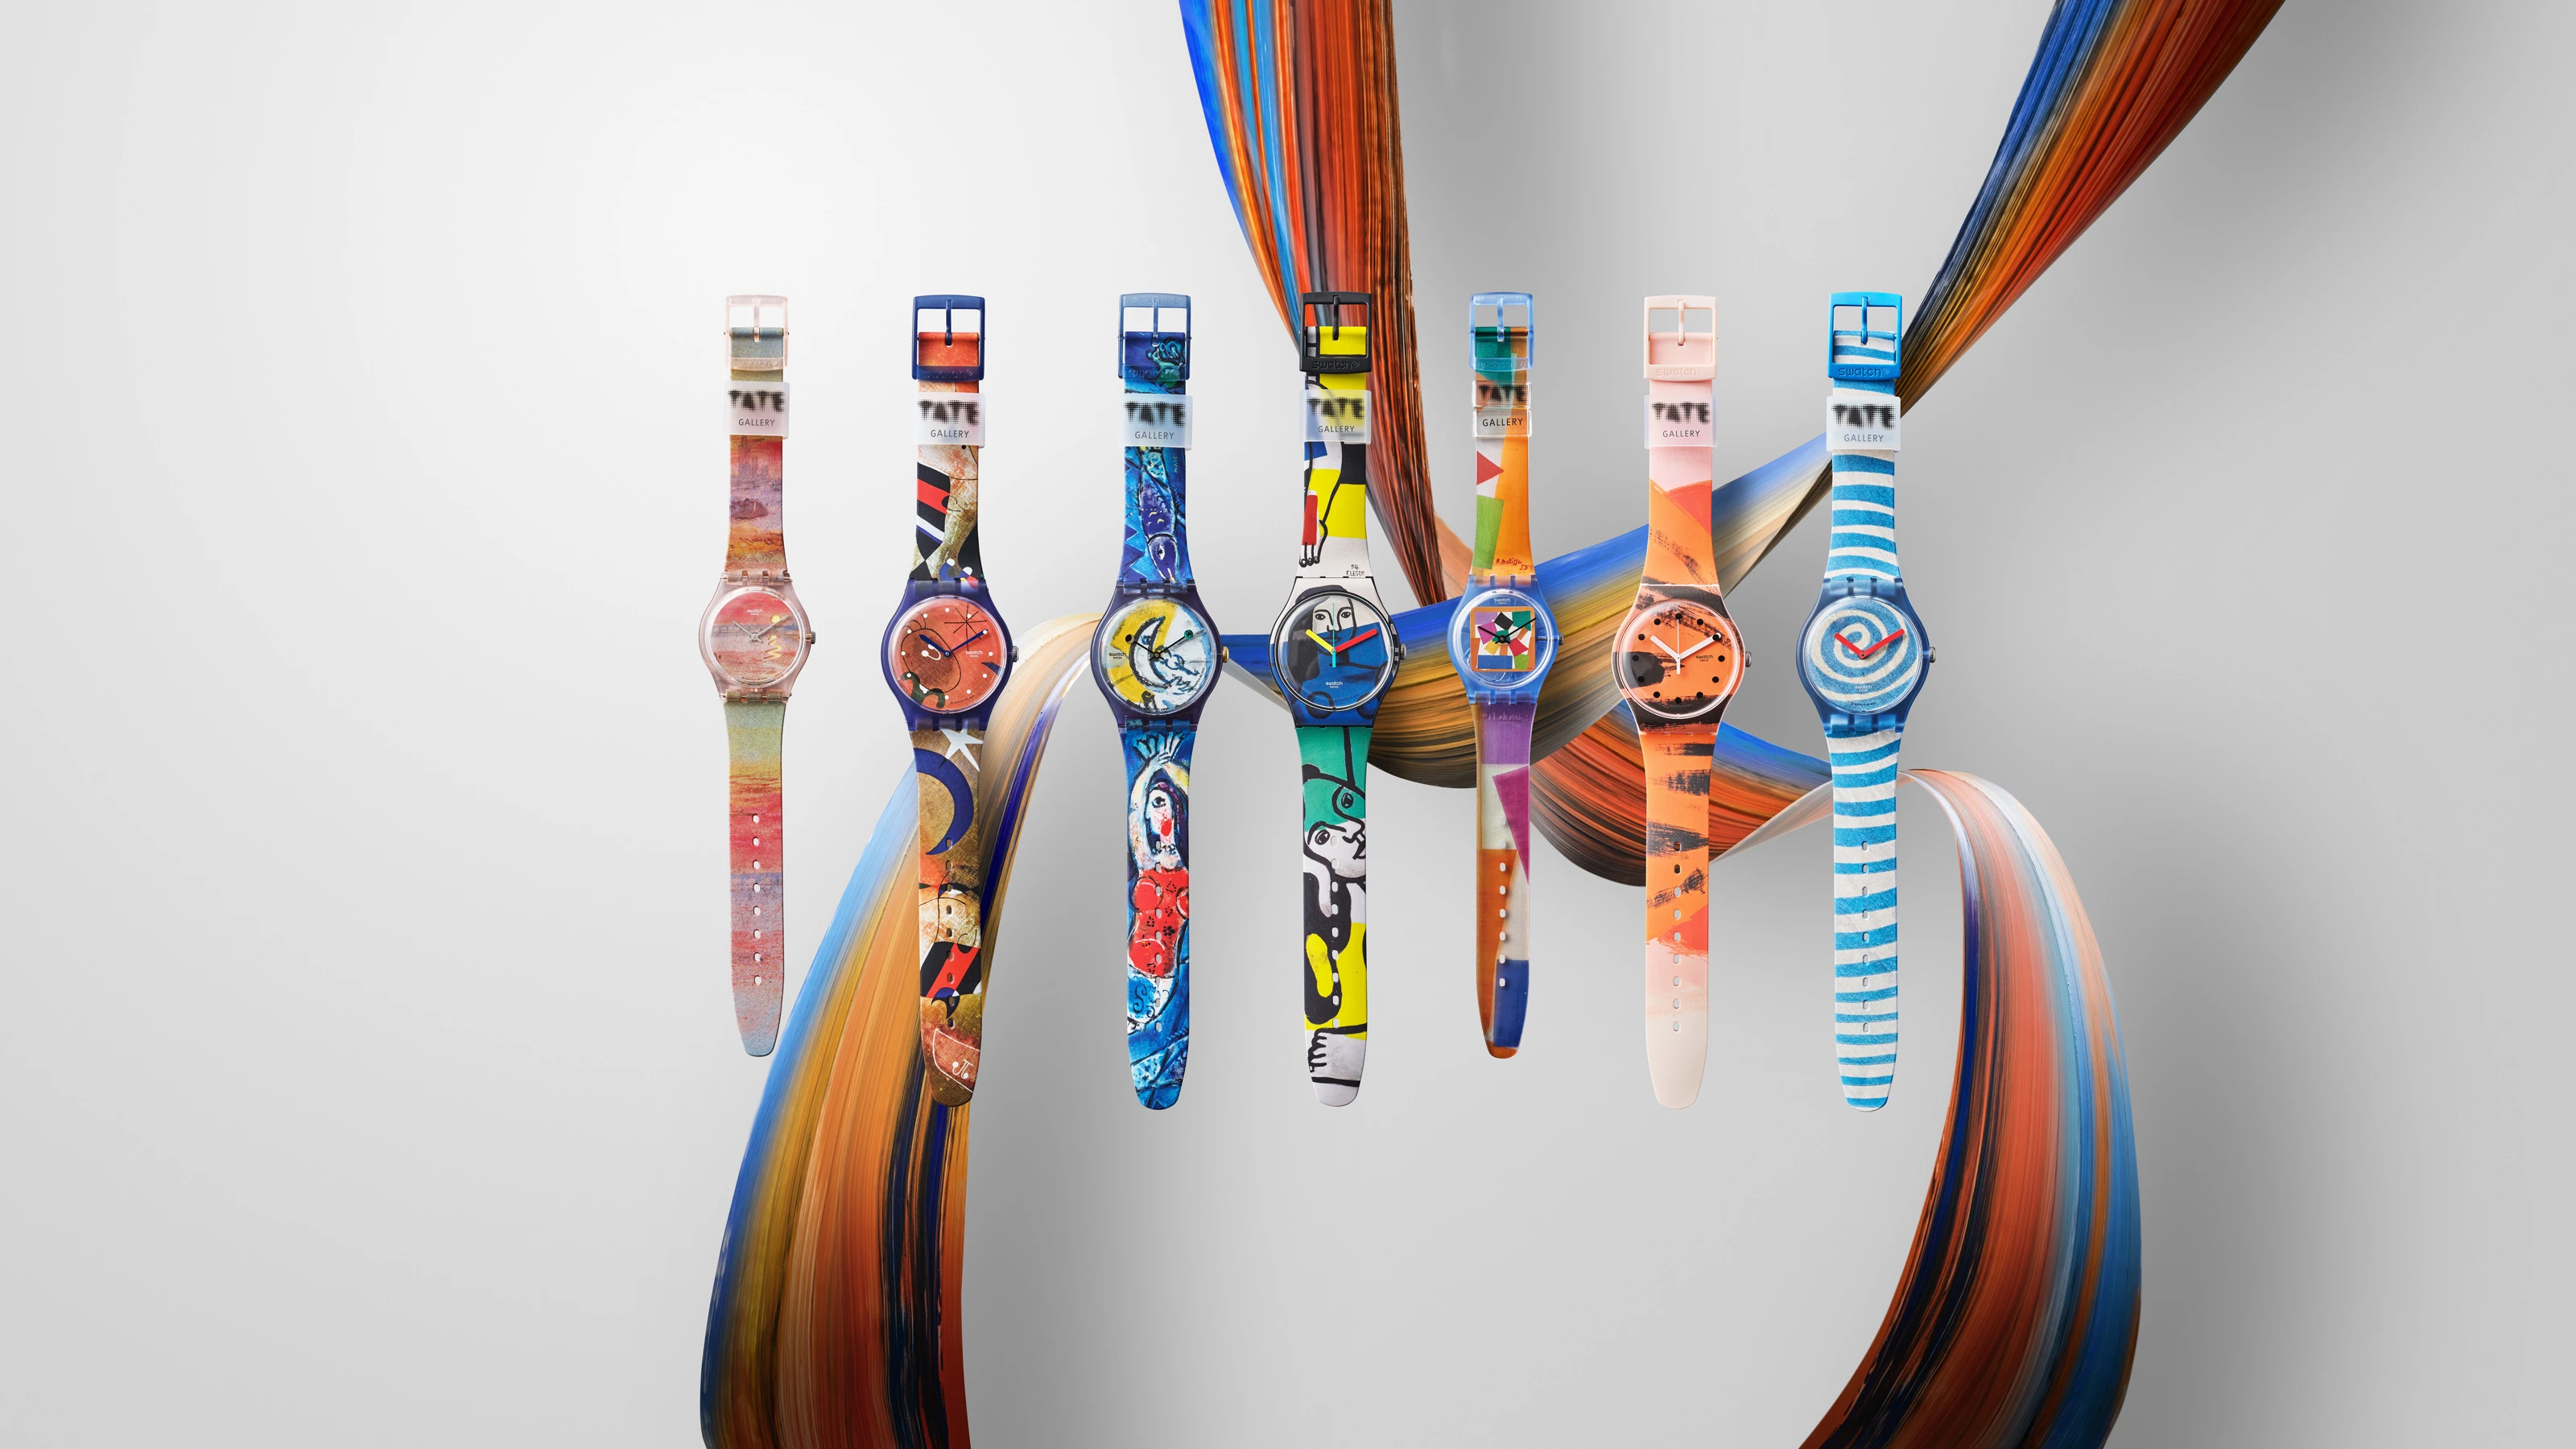 Swatch X Tate Collection: Join us on the Swatch Art Journey 2024 and see where it takes you!